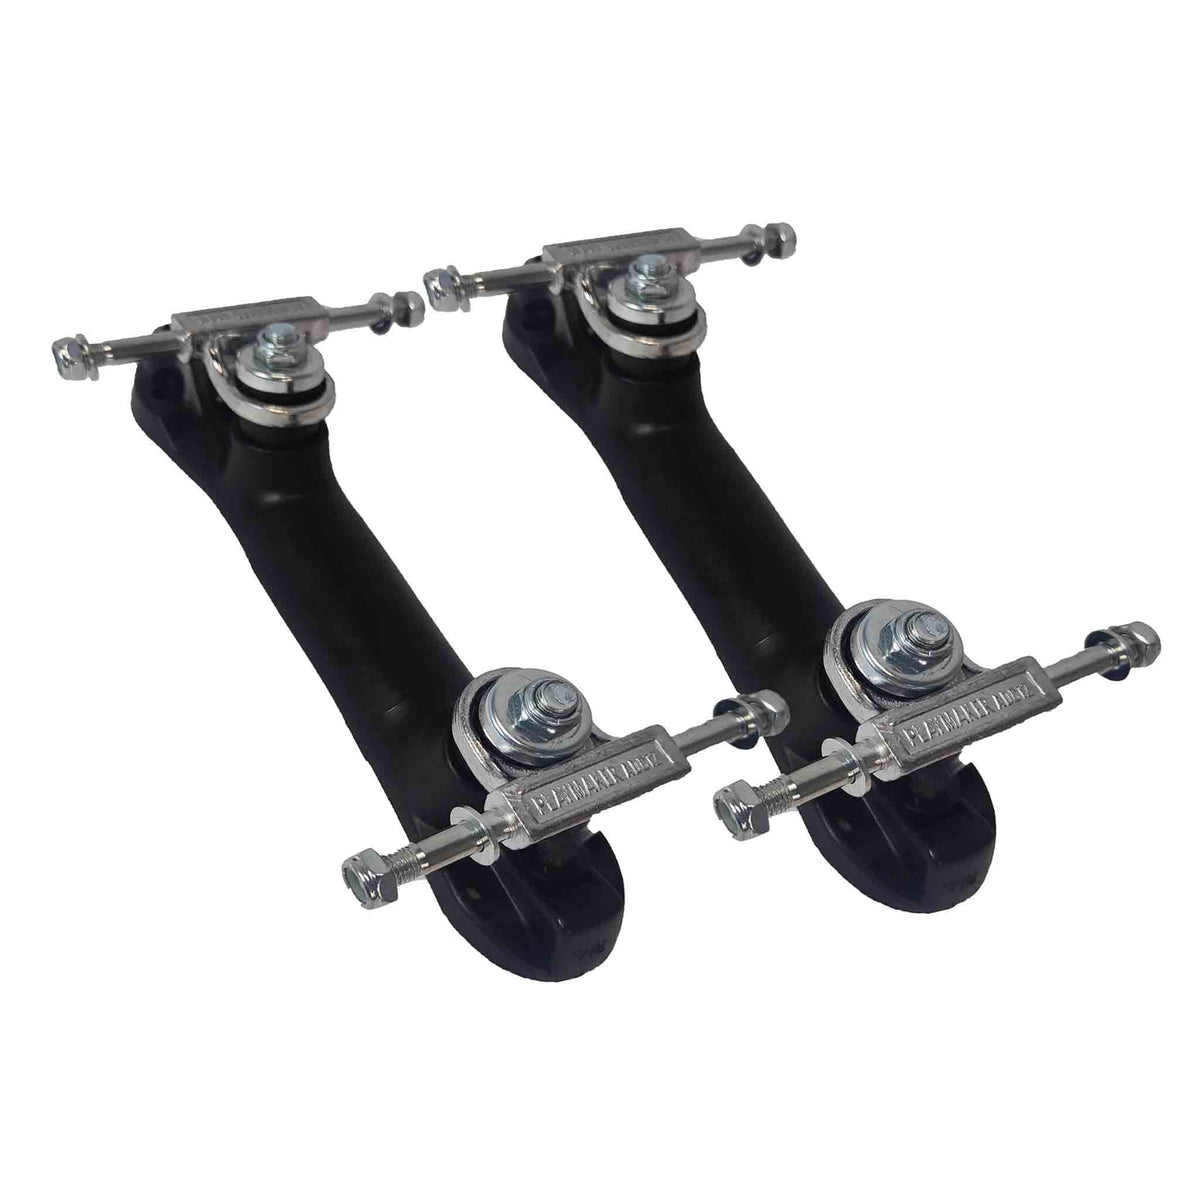 Playmaker Quad Roller Skate Complete Chassis Kit - Set of Pair -Roller Skates Parts and Accessories | JT Skate